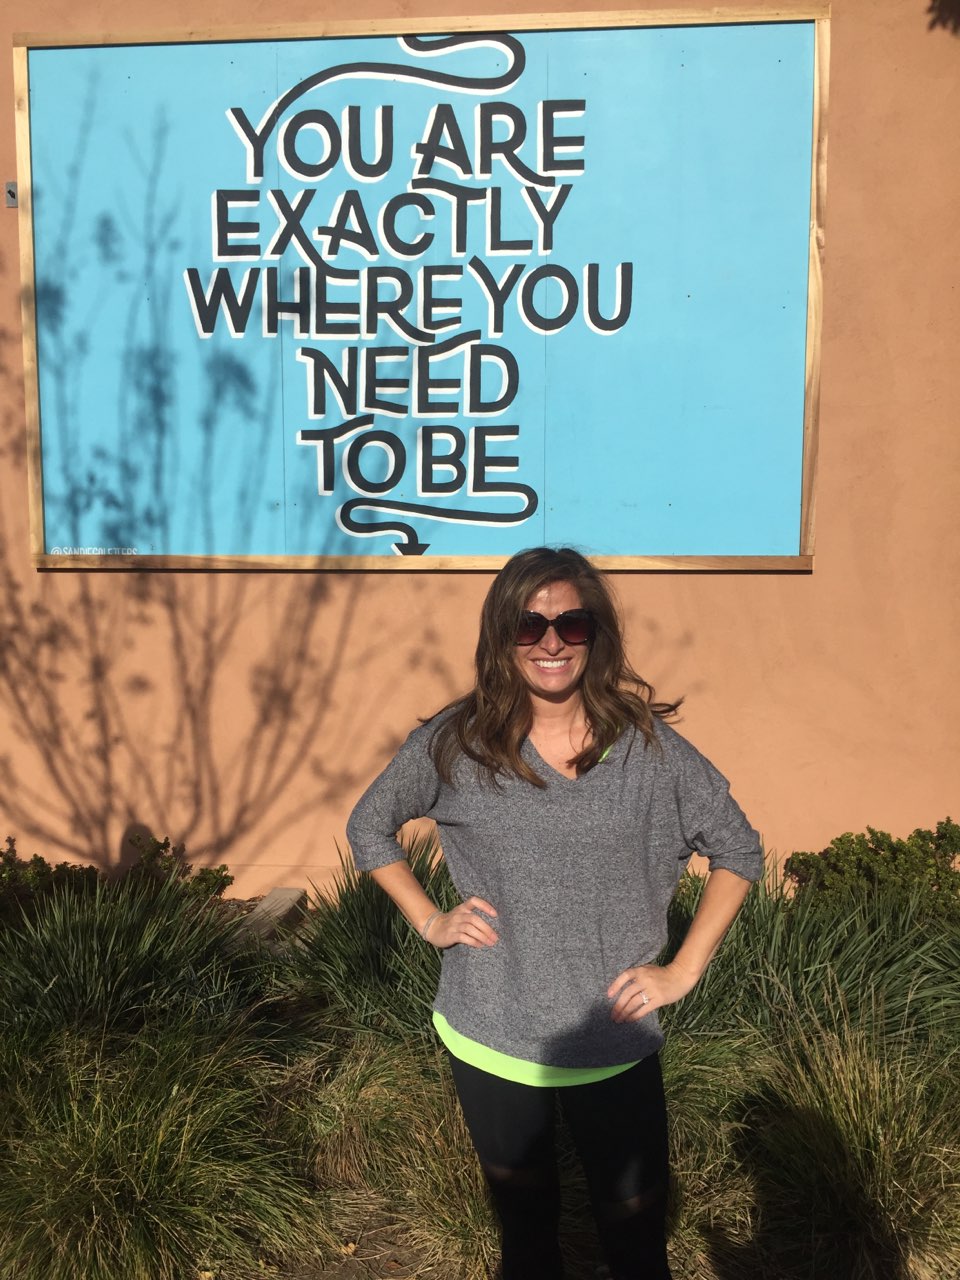 peek counseling, perfectionism, dealing with perfectionism as a teen, teen body image, teen stress, counselor for teens, teen counselor, katie bisbee-peek, counseling adolescents, young adult counseling, katie bisbee-peek